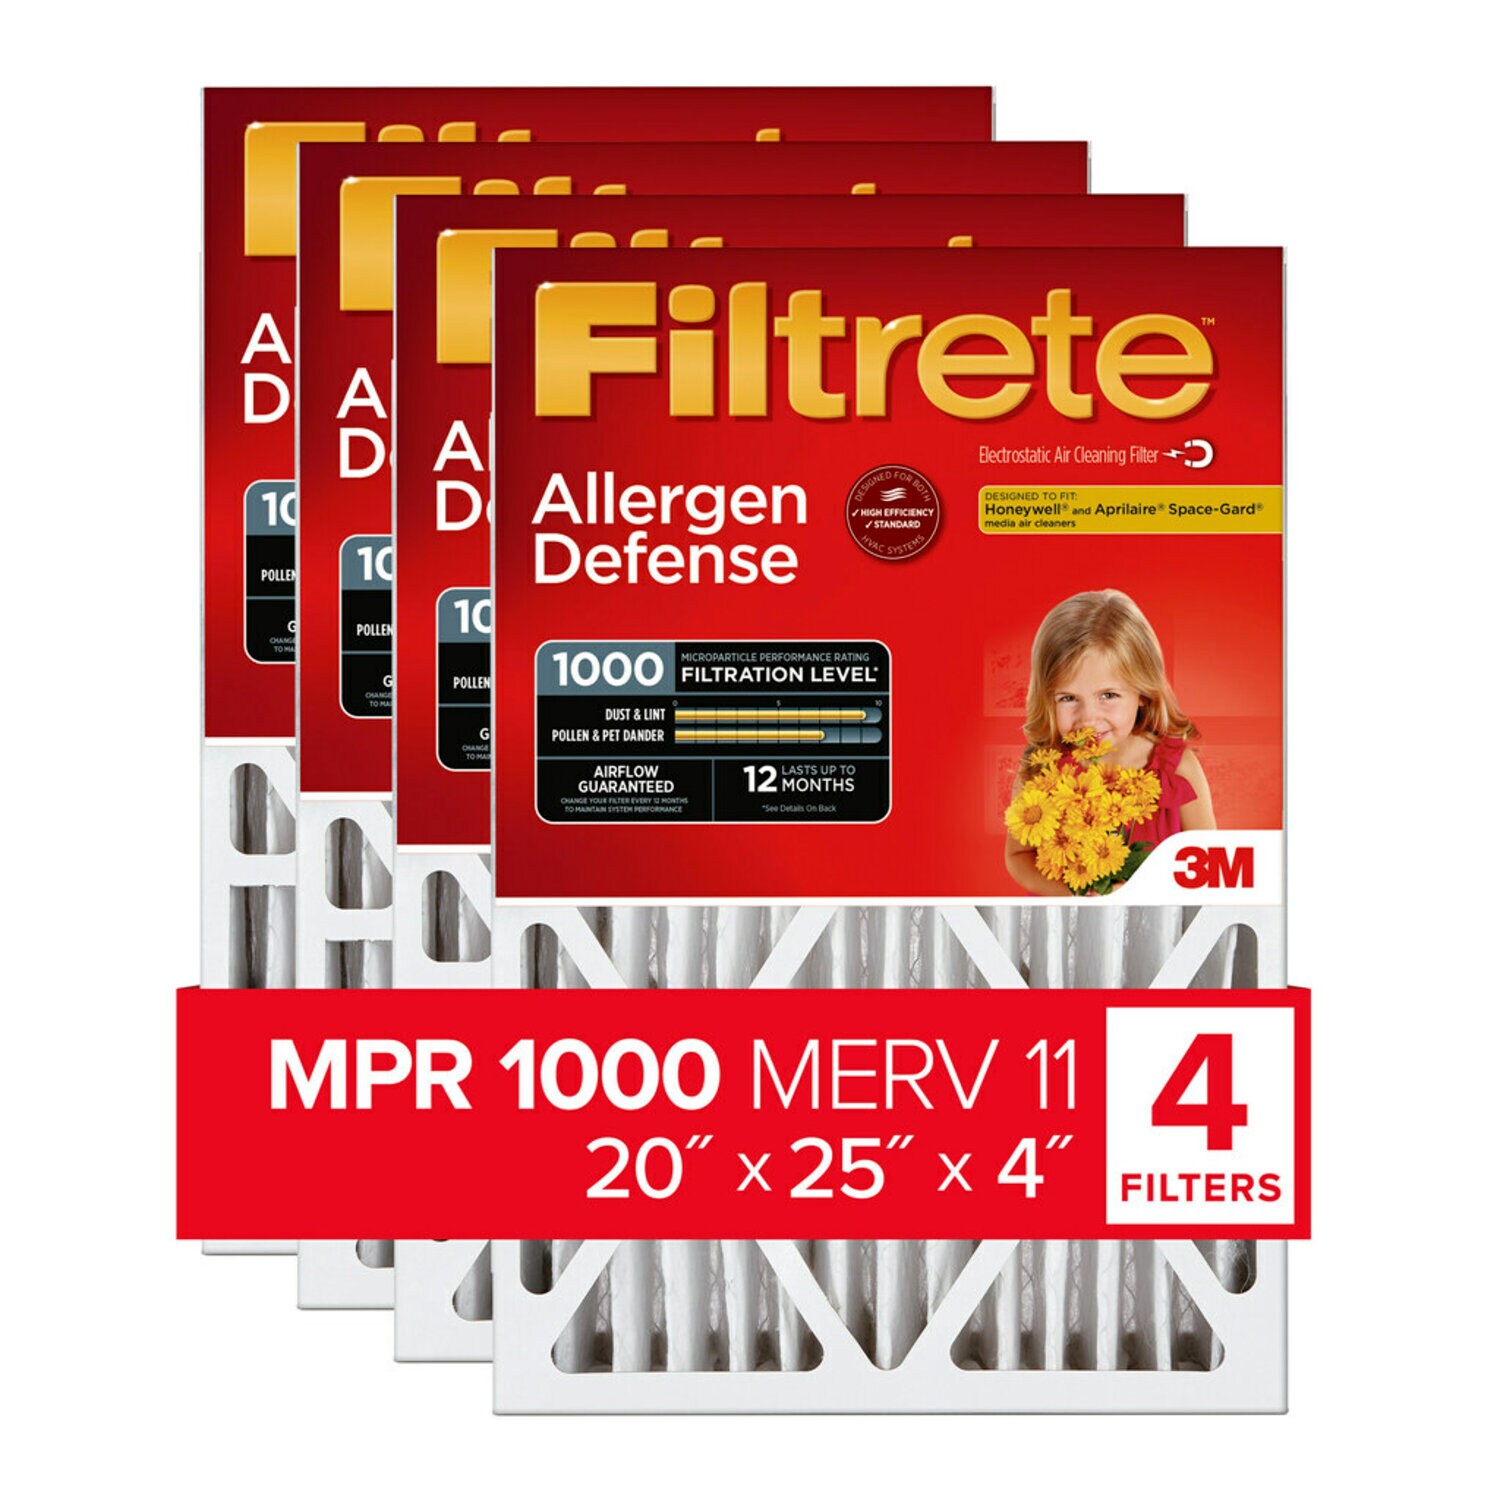 7100097243 - Filtrete Allergen Reduction Deep Pleat Filter’ NADP03-4IN-4, 20 in x 25 in x 4 in , 1/Pack, 4 eaches/case